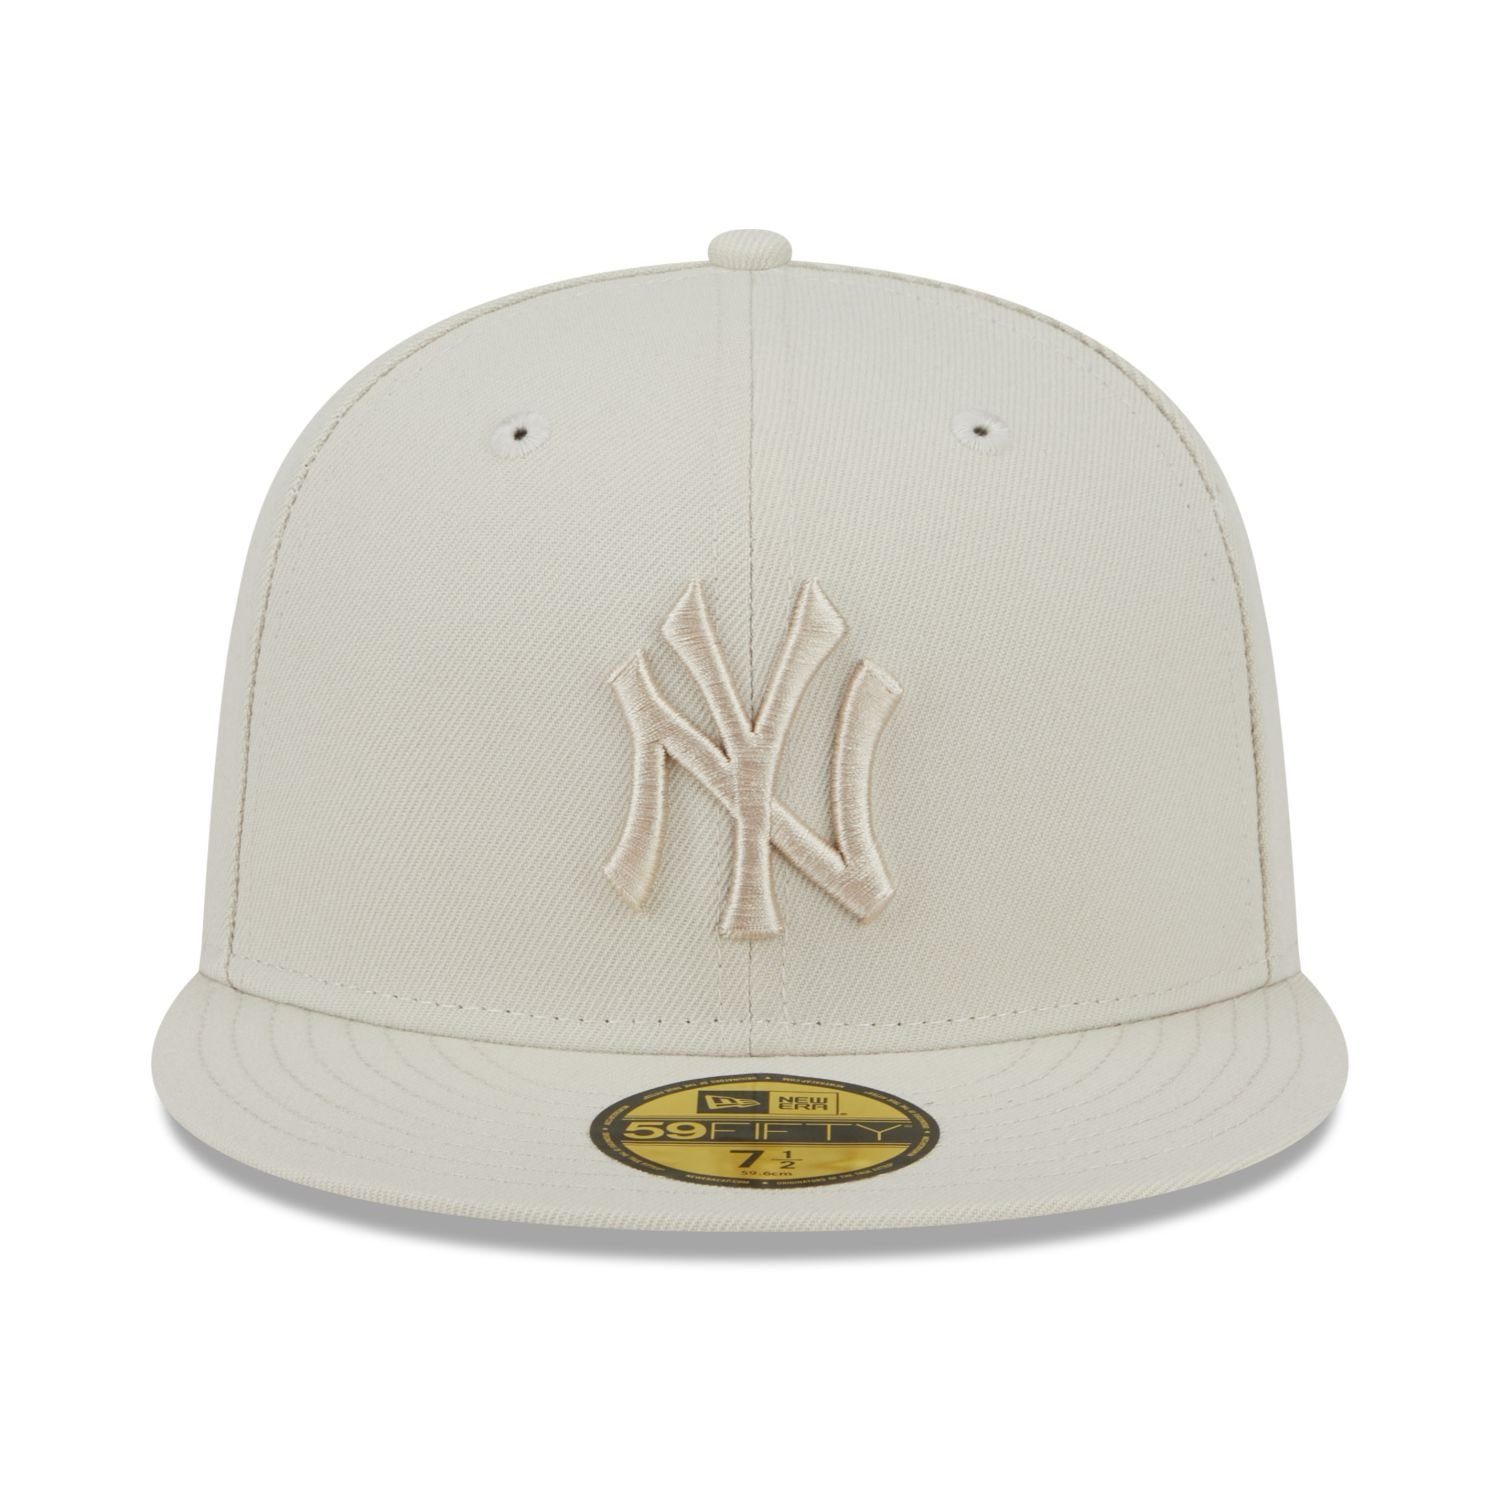 Fitted York New Cap 59Fifty Era Yankees New MLB